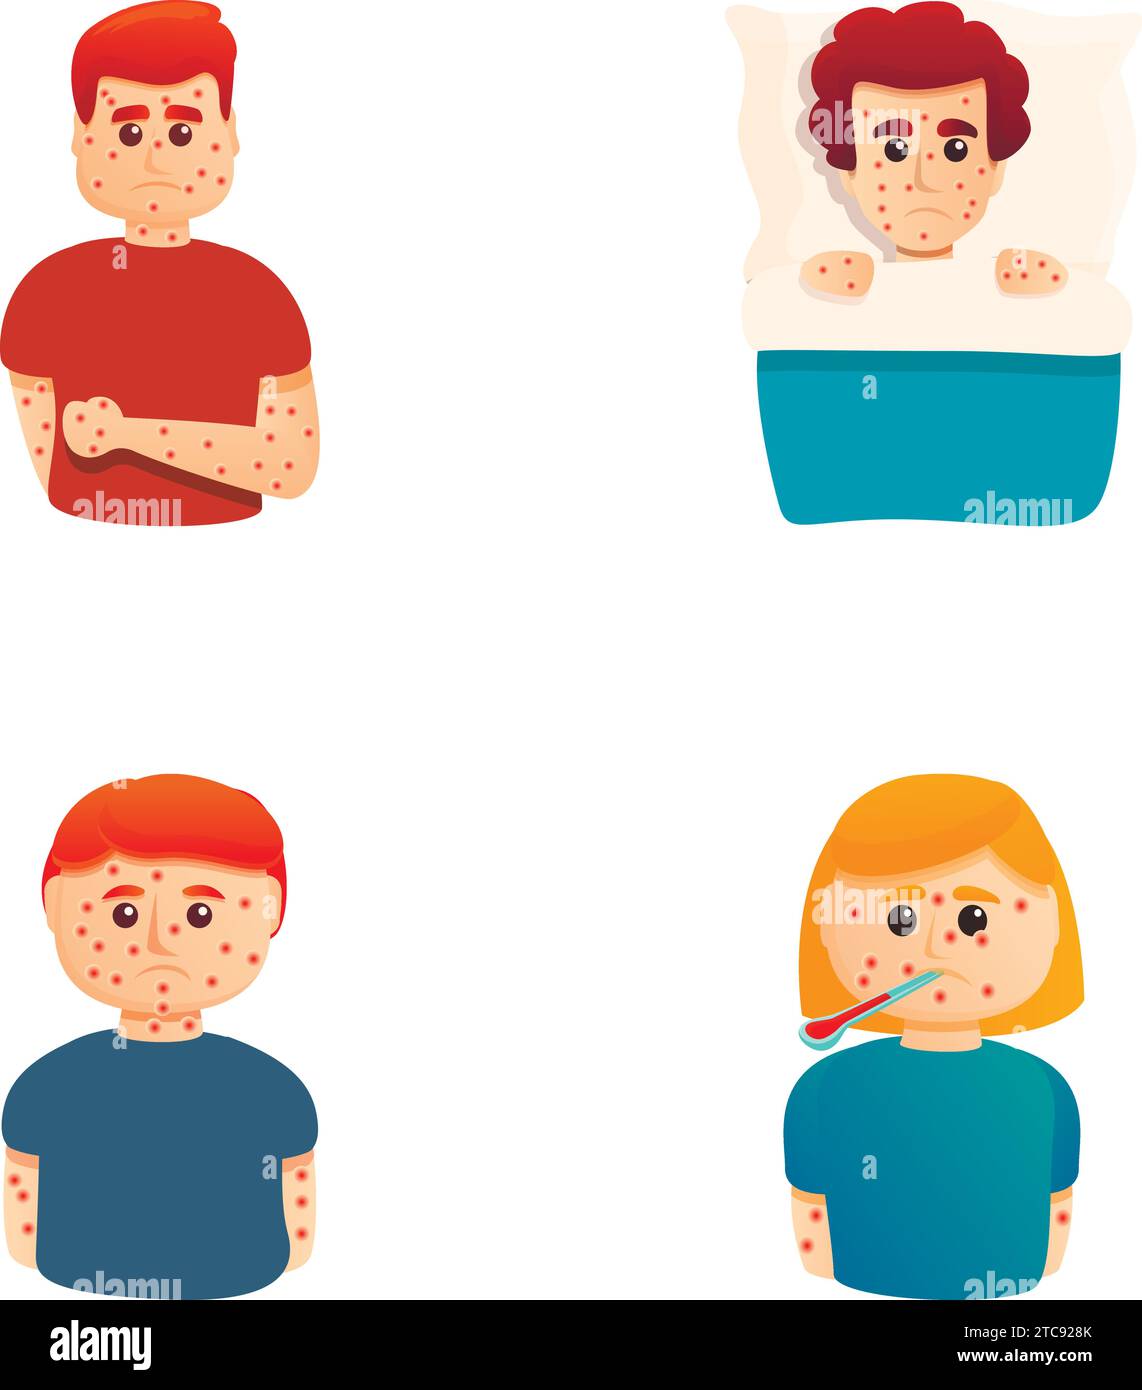 Sick person icons set cartoon vector. People with itchy, blistered skin. Viral disease, illness Stock Vector